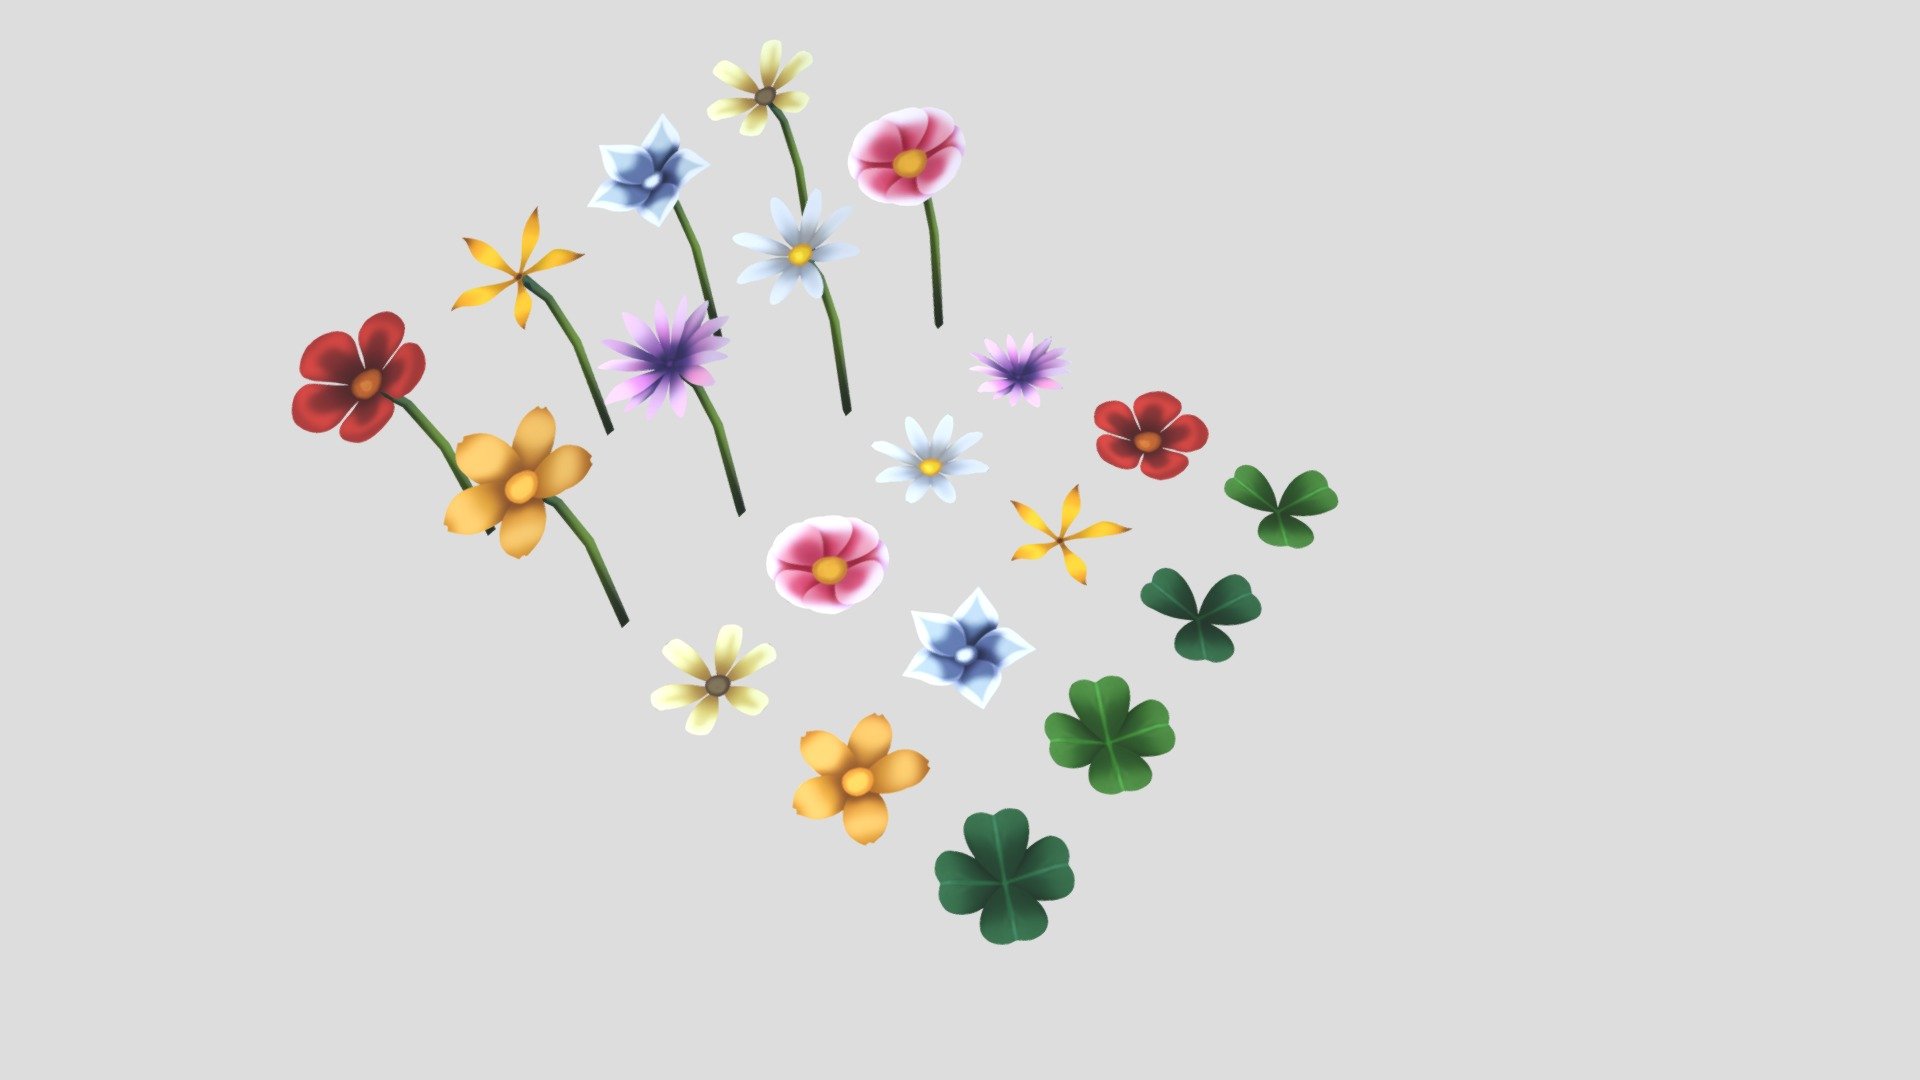 Handpainted flowers pack
In this pack you will find all the essentials to make a beautiful scenes!

The pack contains :

-8 types of flowers.
-4 types of clovers.

To know:

-All textures are in 2048x2048
-Compatible URP
-Compatible HDRP
-Compatible with Unity terrain tool (trees, grass etc)

Tips :

-Assets were designed for games with a top-down view camera.(high angle shot)

Contact

If you have any questions or suggestions about the assets contact me via my publisher page! - Handpainted Flowers Pack - Buy Royalty Free 3D model by Chromisu 3d model